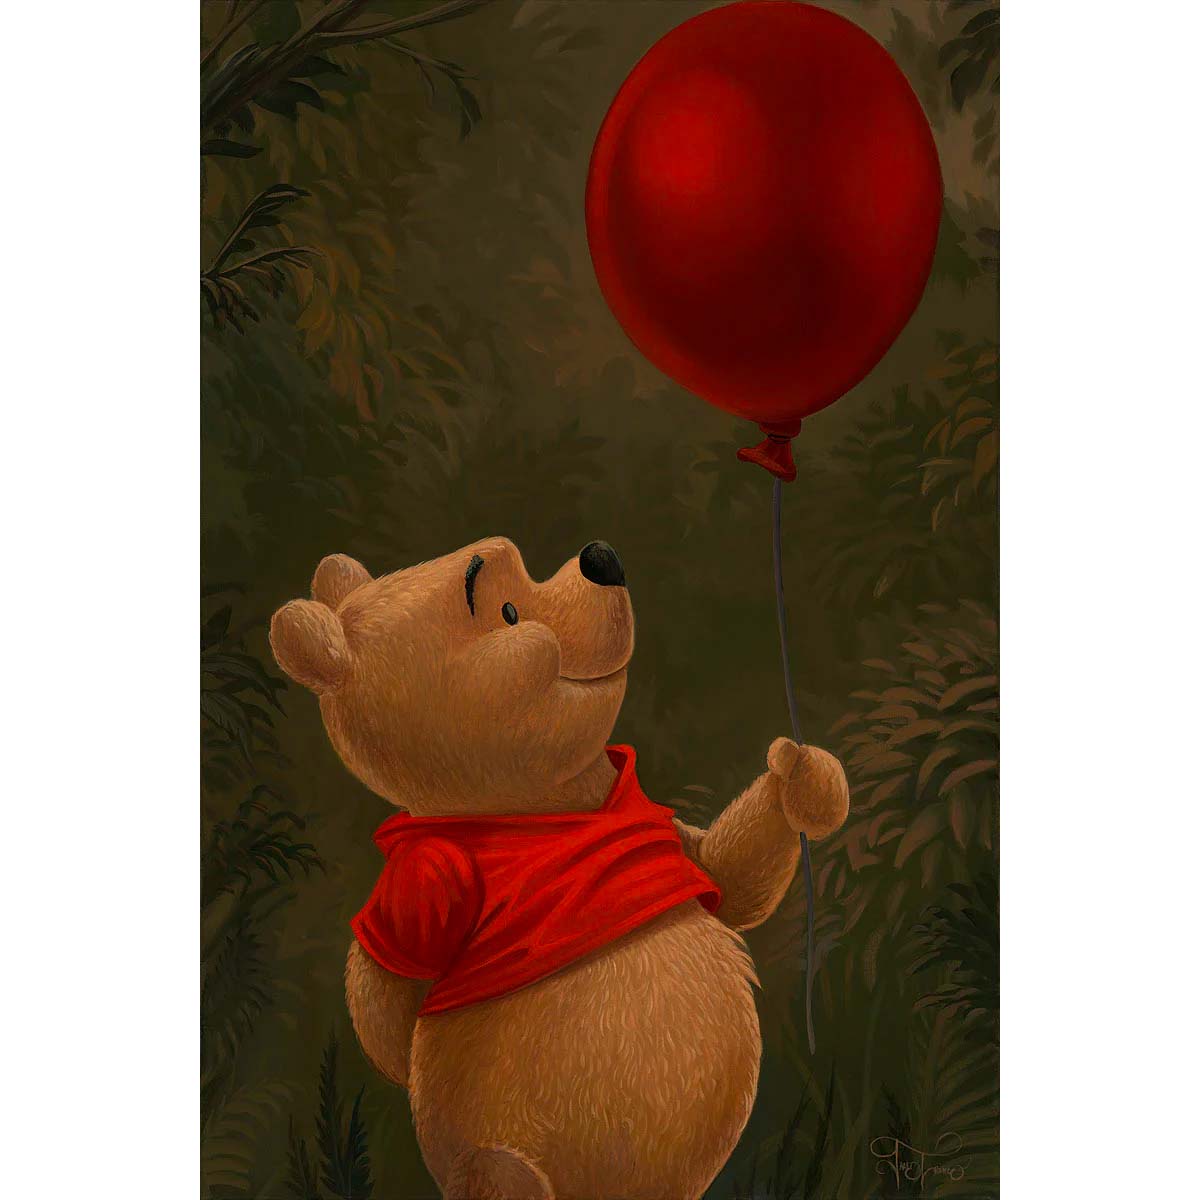 Jared Franco Disney "Pooh and His Balloon" Limited Edition Canvas Giclee